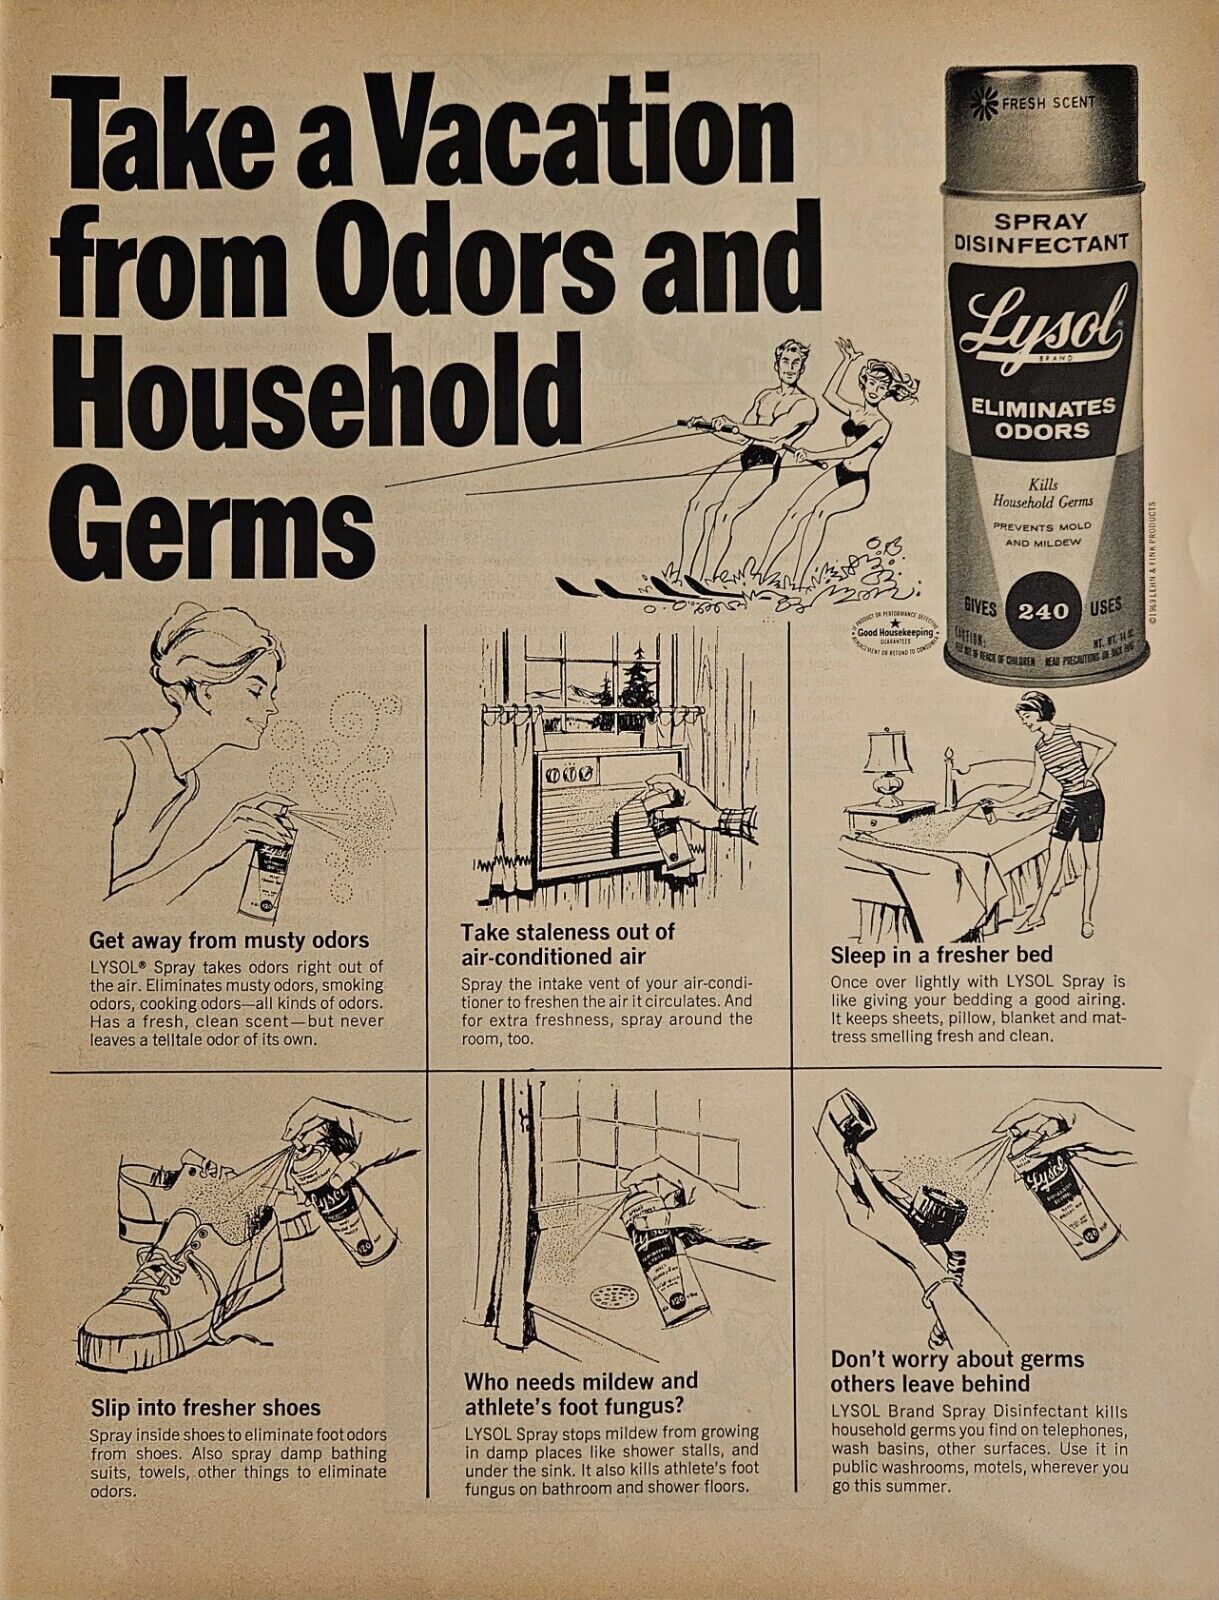 1969 Vacation from Odors Household Germs Lysol Vintage Print Ad Comic